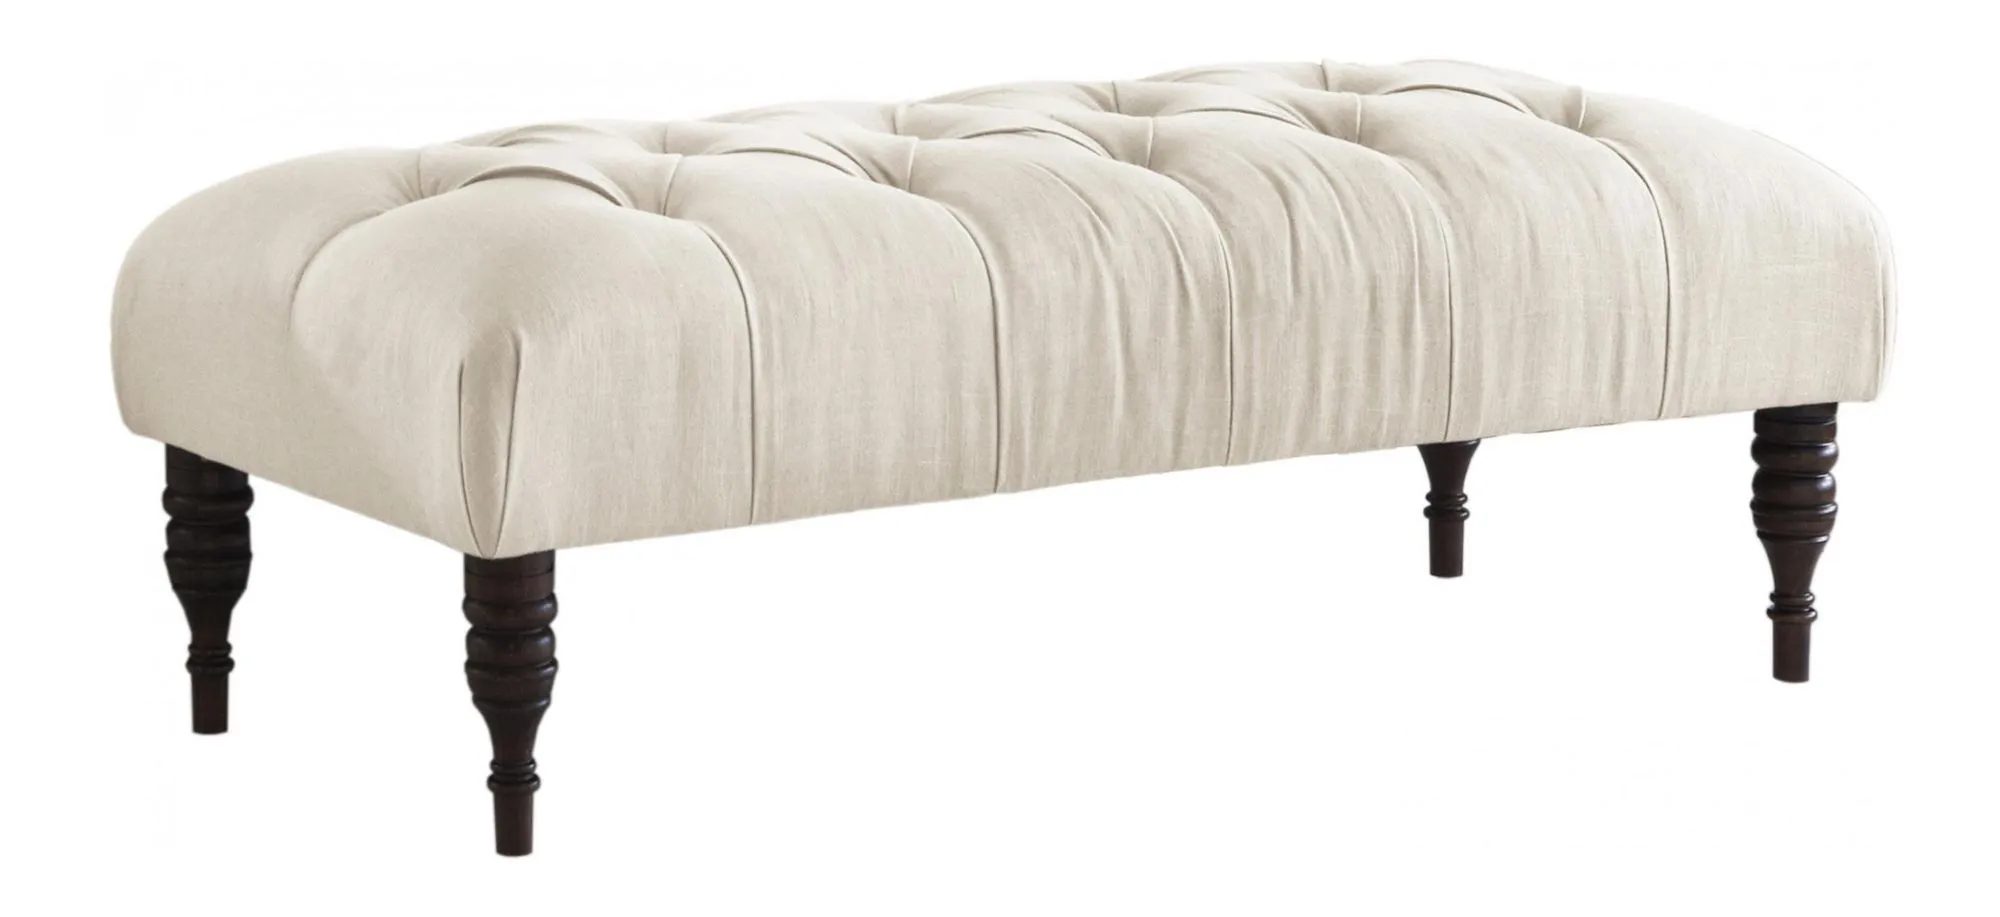 Banks Bench in Linen Talc by Skyline